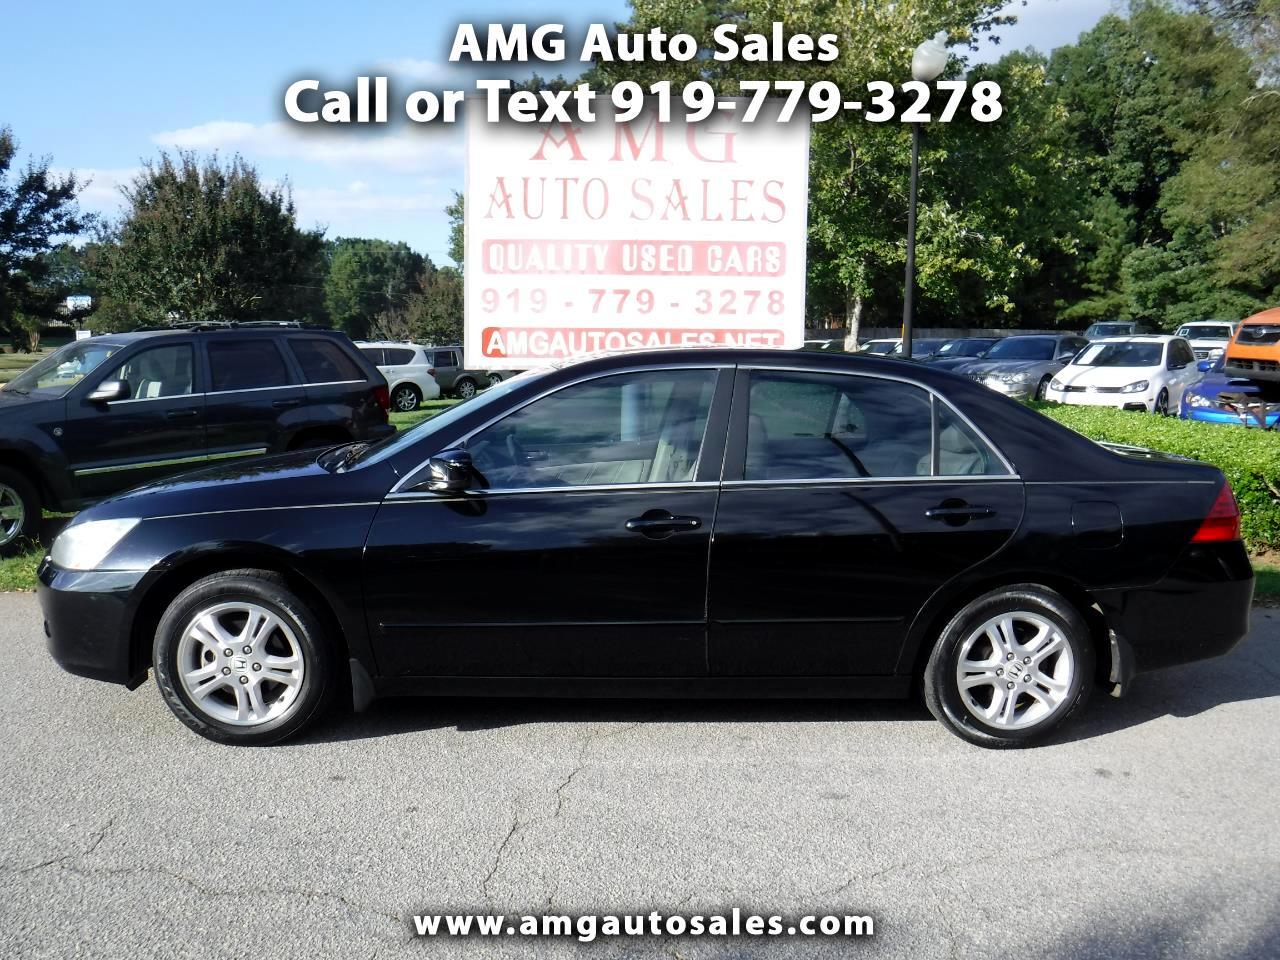 Used 2007 Honda Accord Ex L Sedan At For Sale In Raleigh Nc